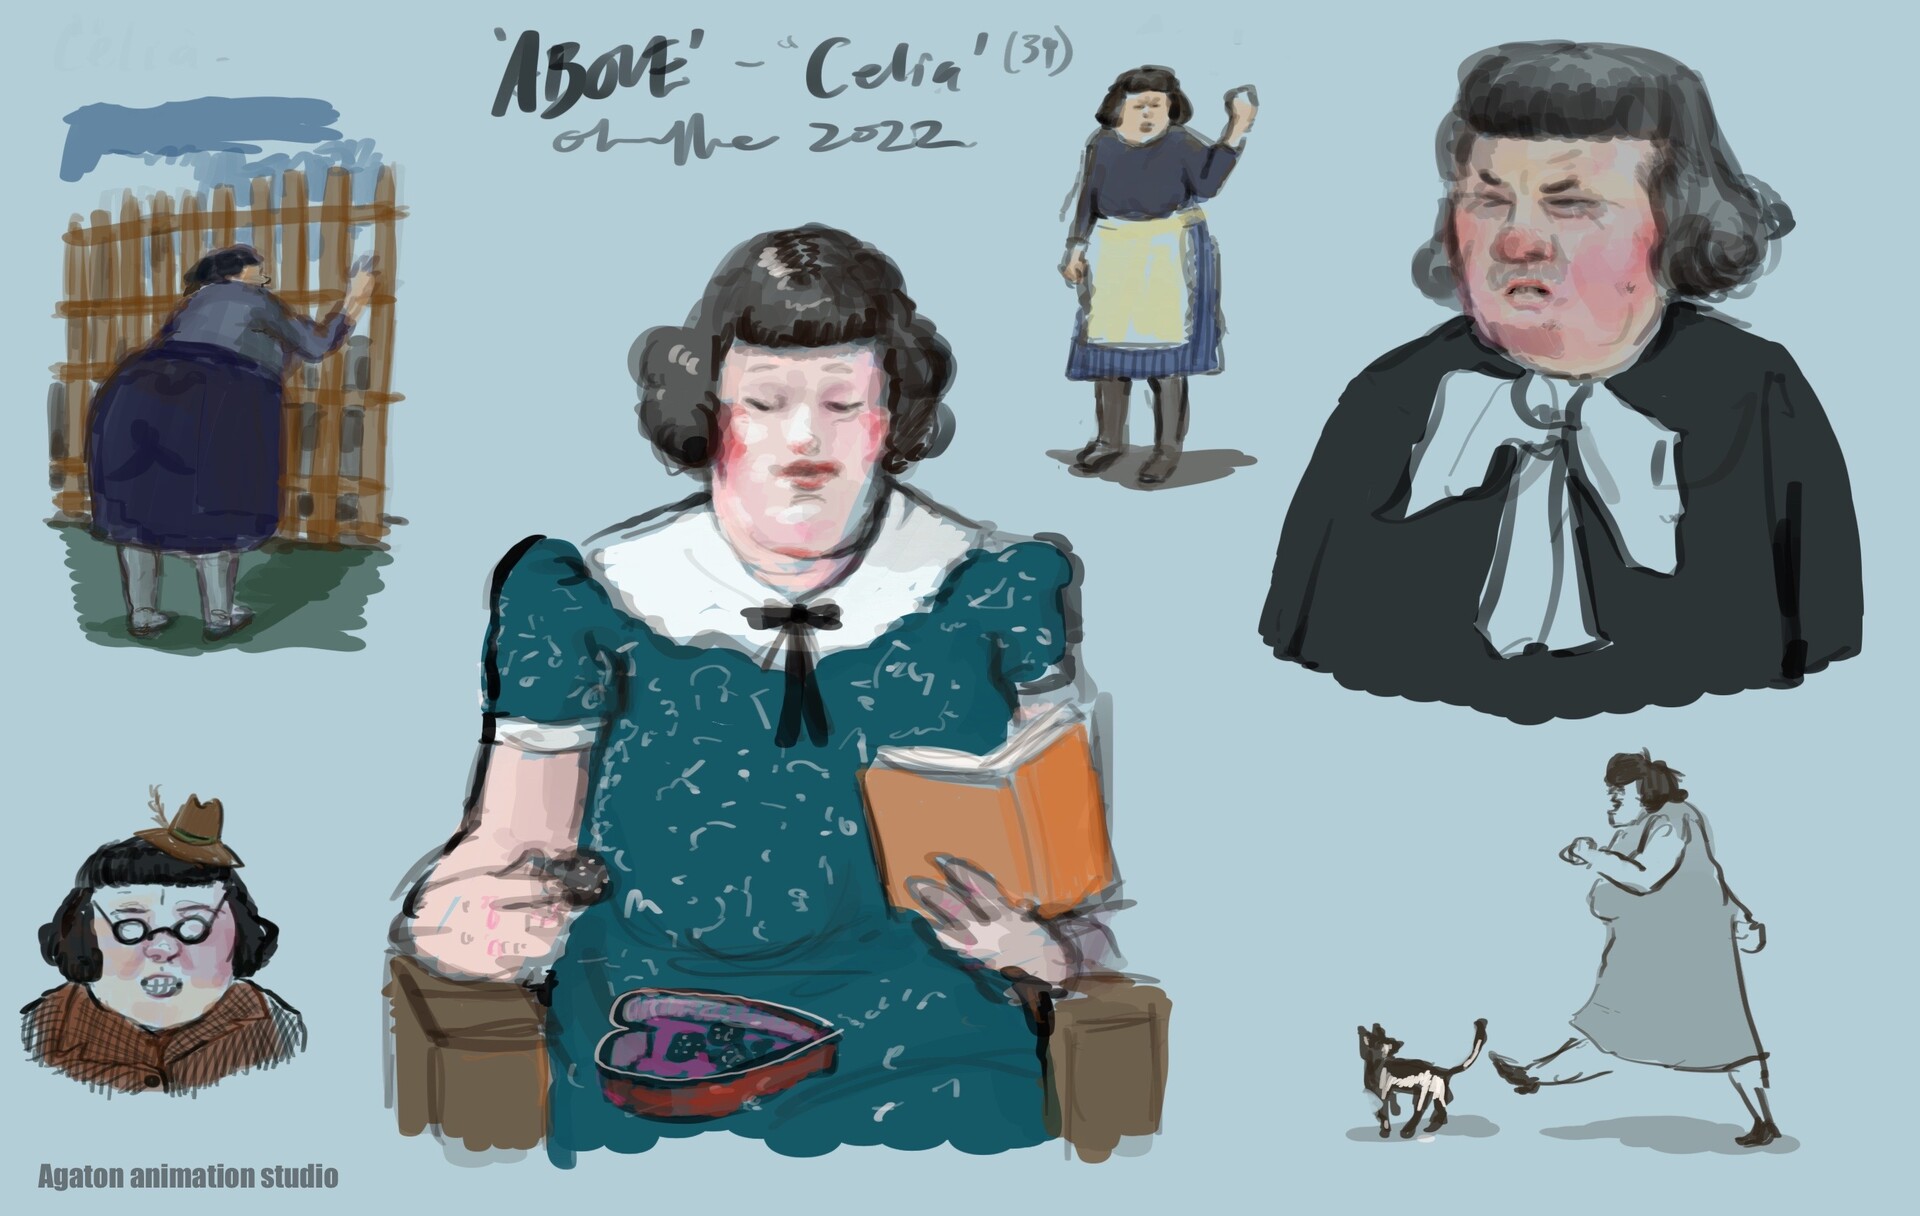 ArtStation - 7 Character sketches for animation set in Warsaw, Poland, 1943